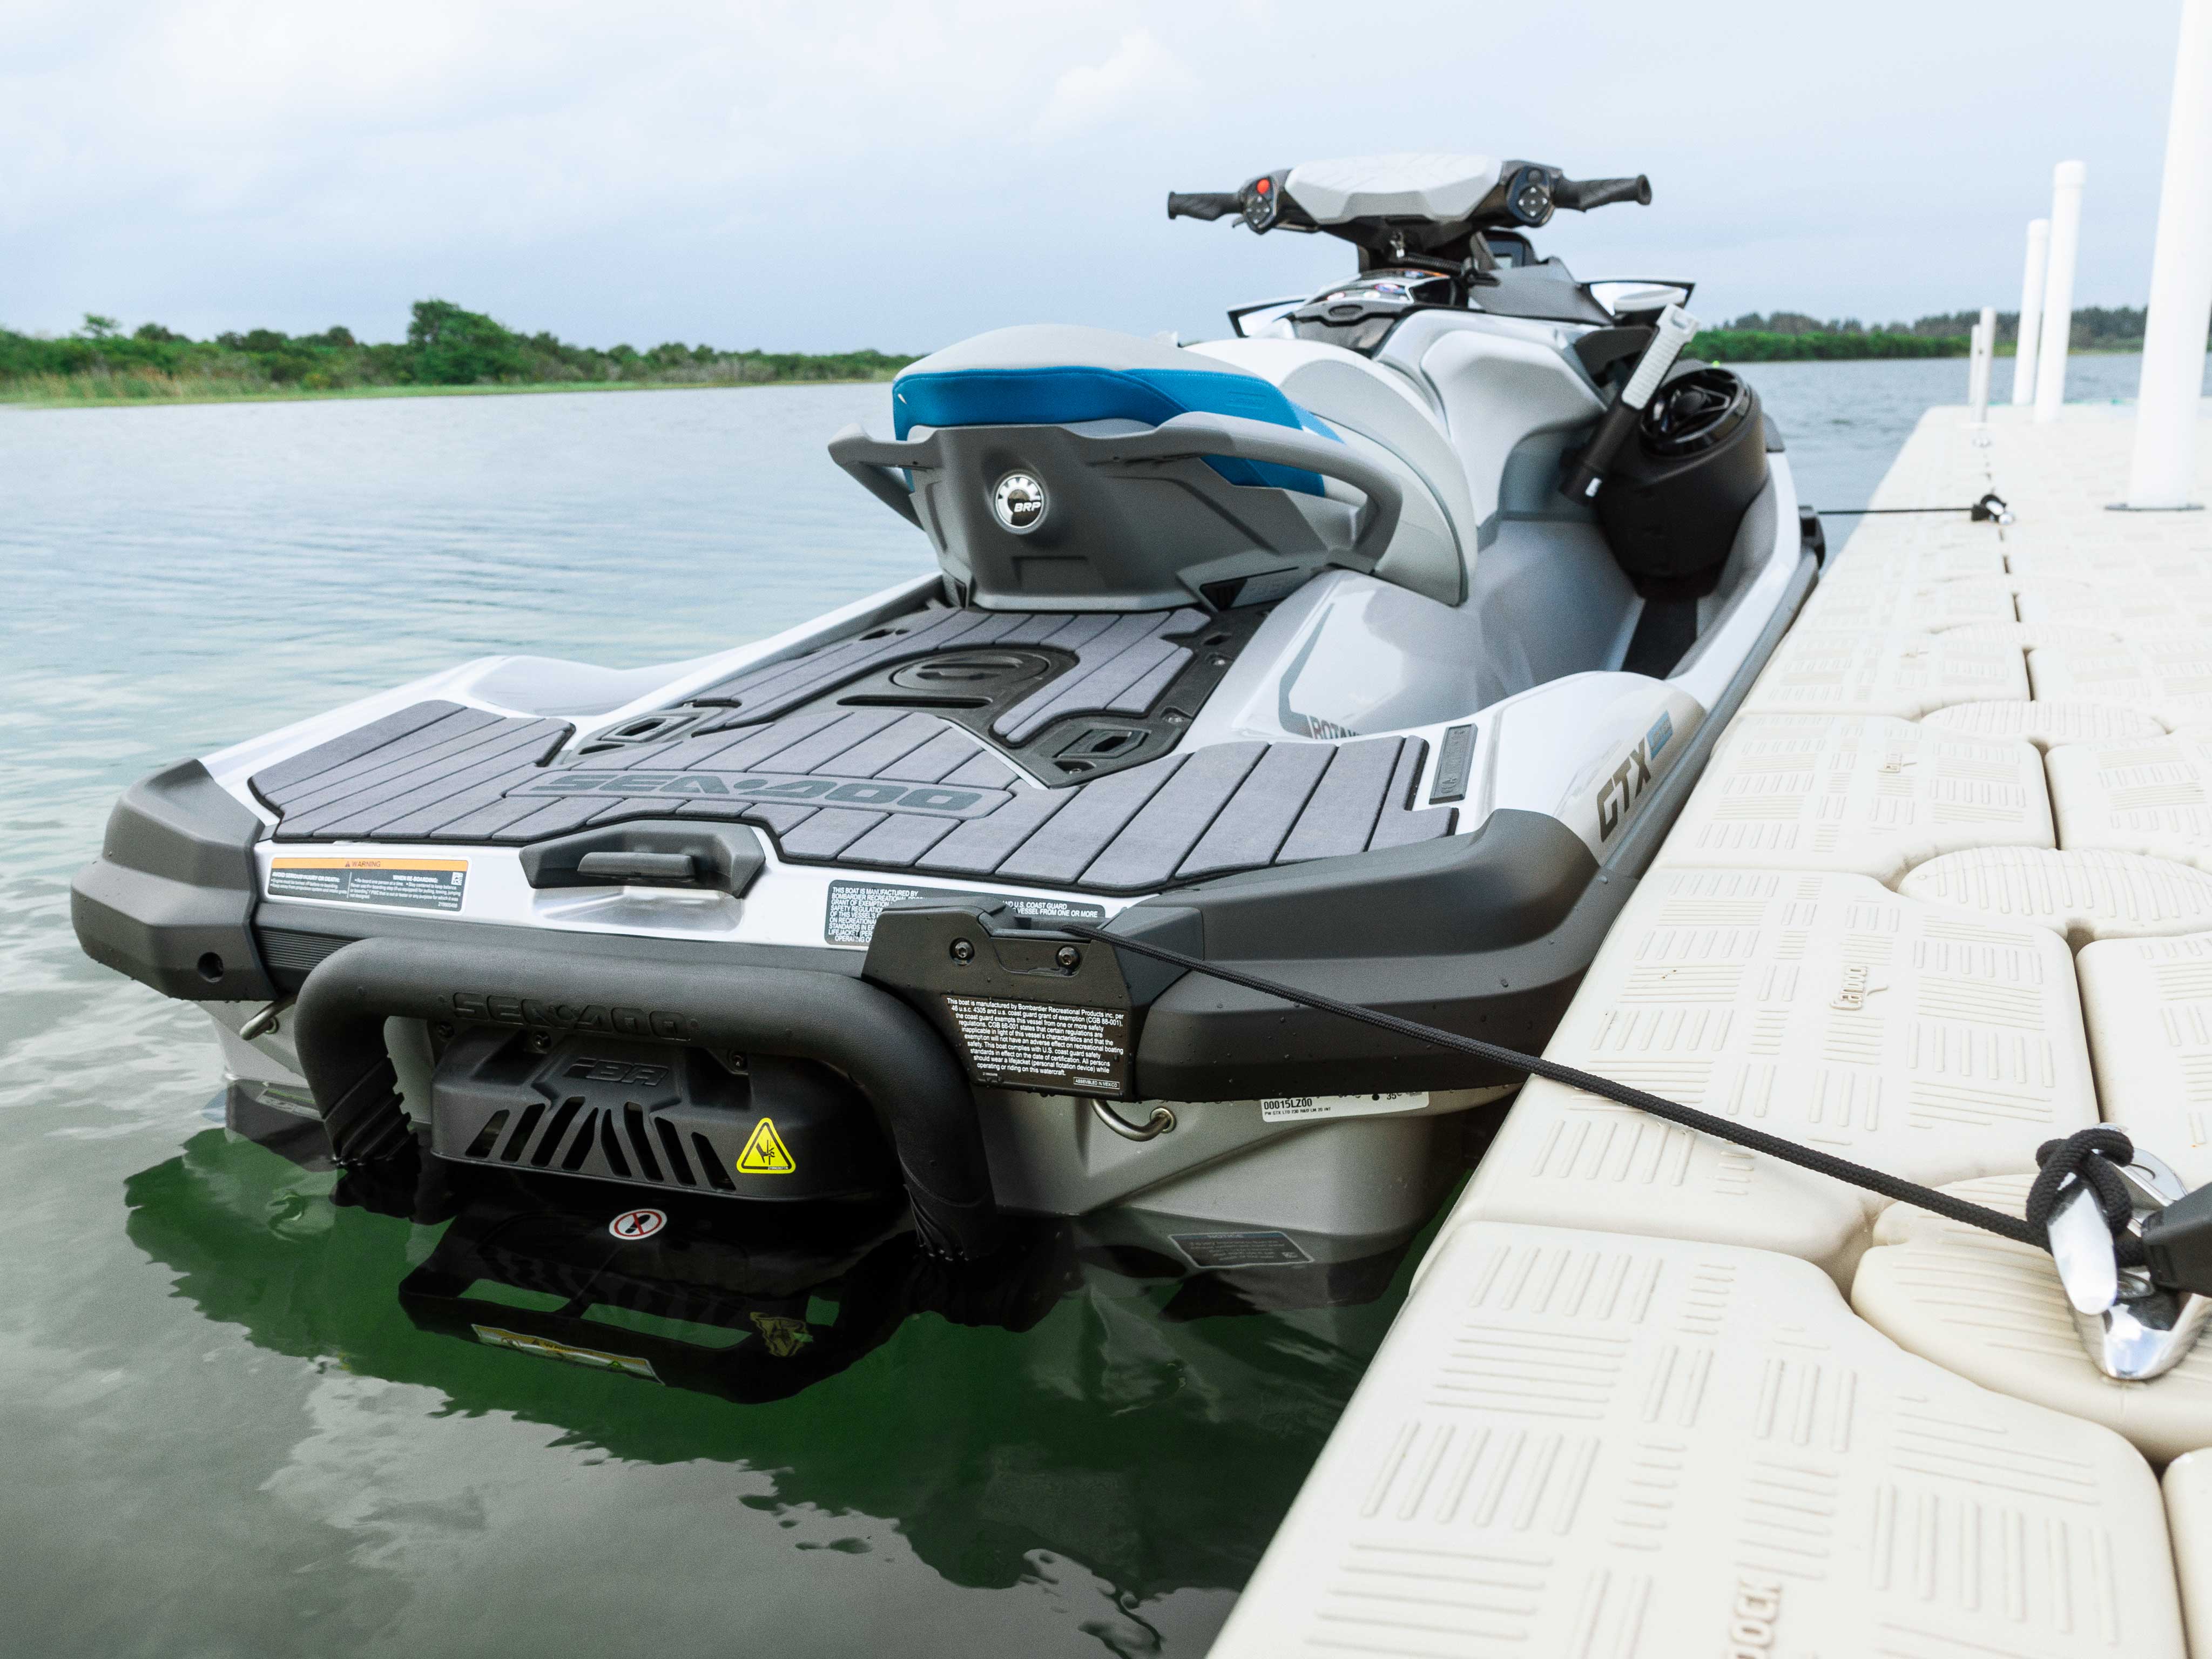 Doo It Right: Launching and landing your Sea-Doo